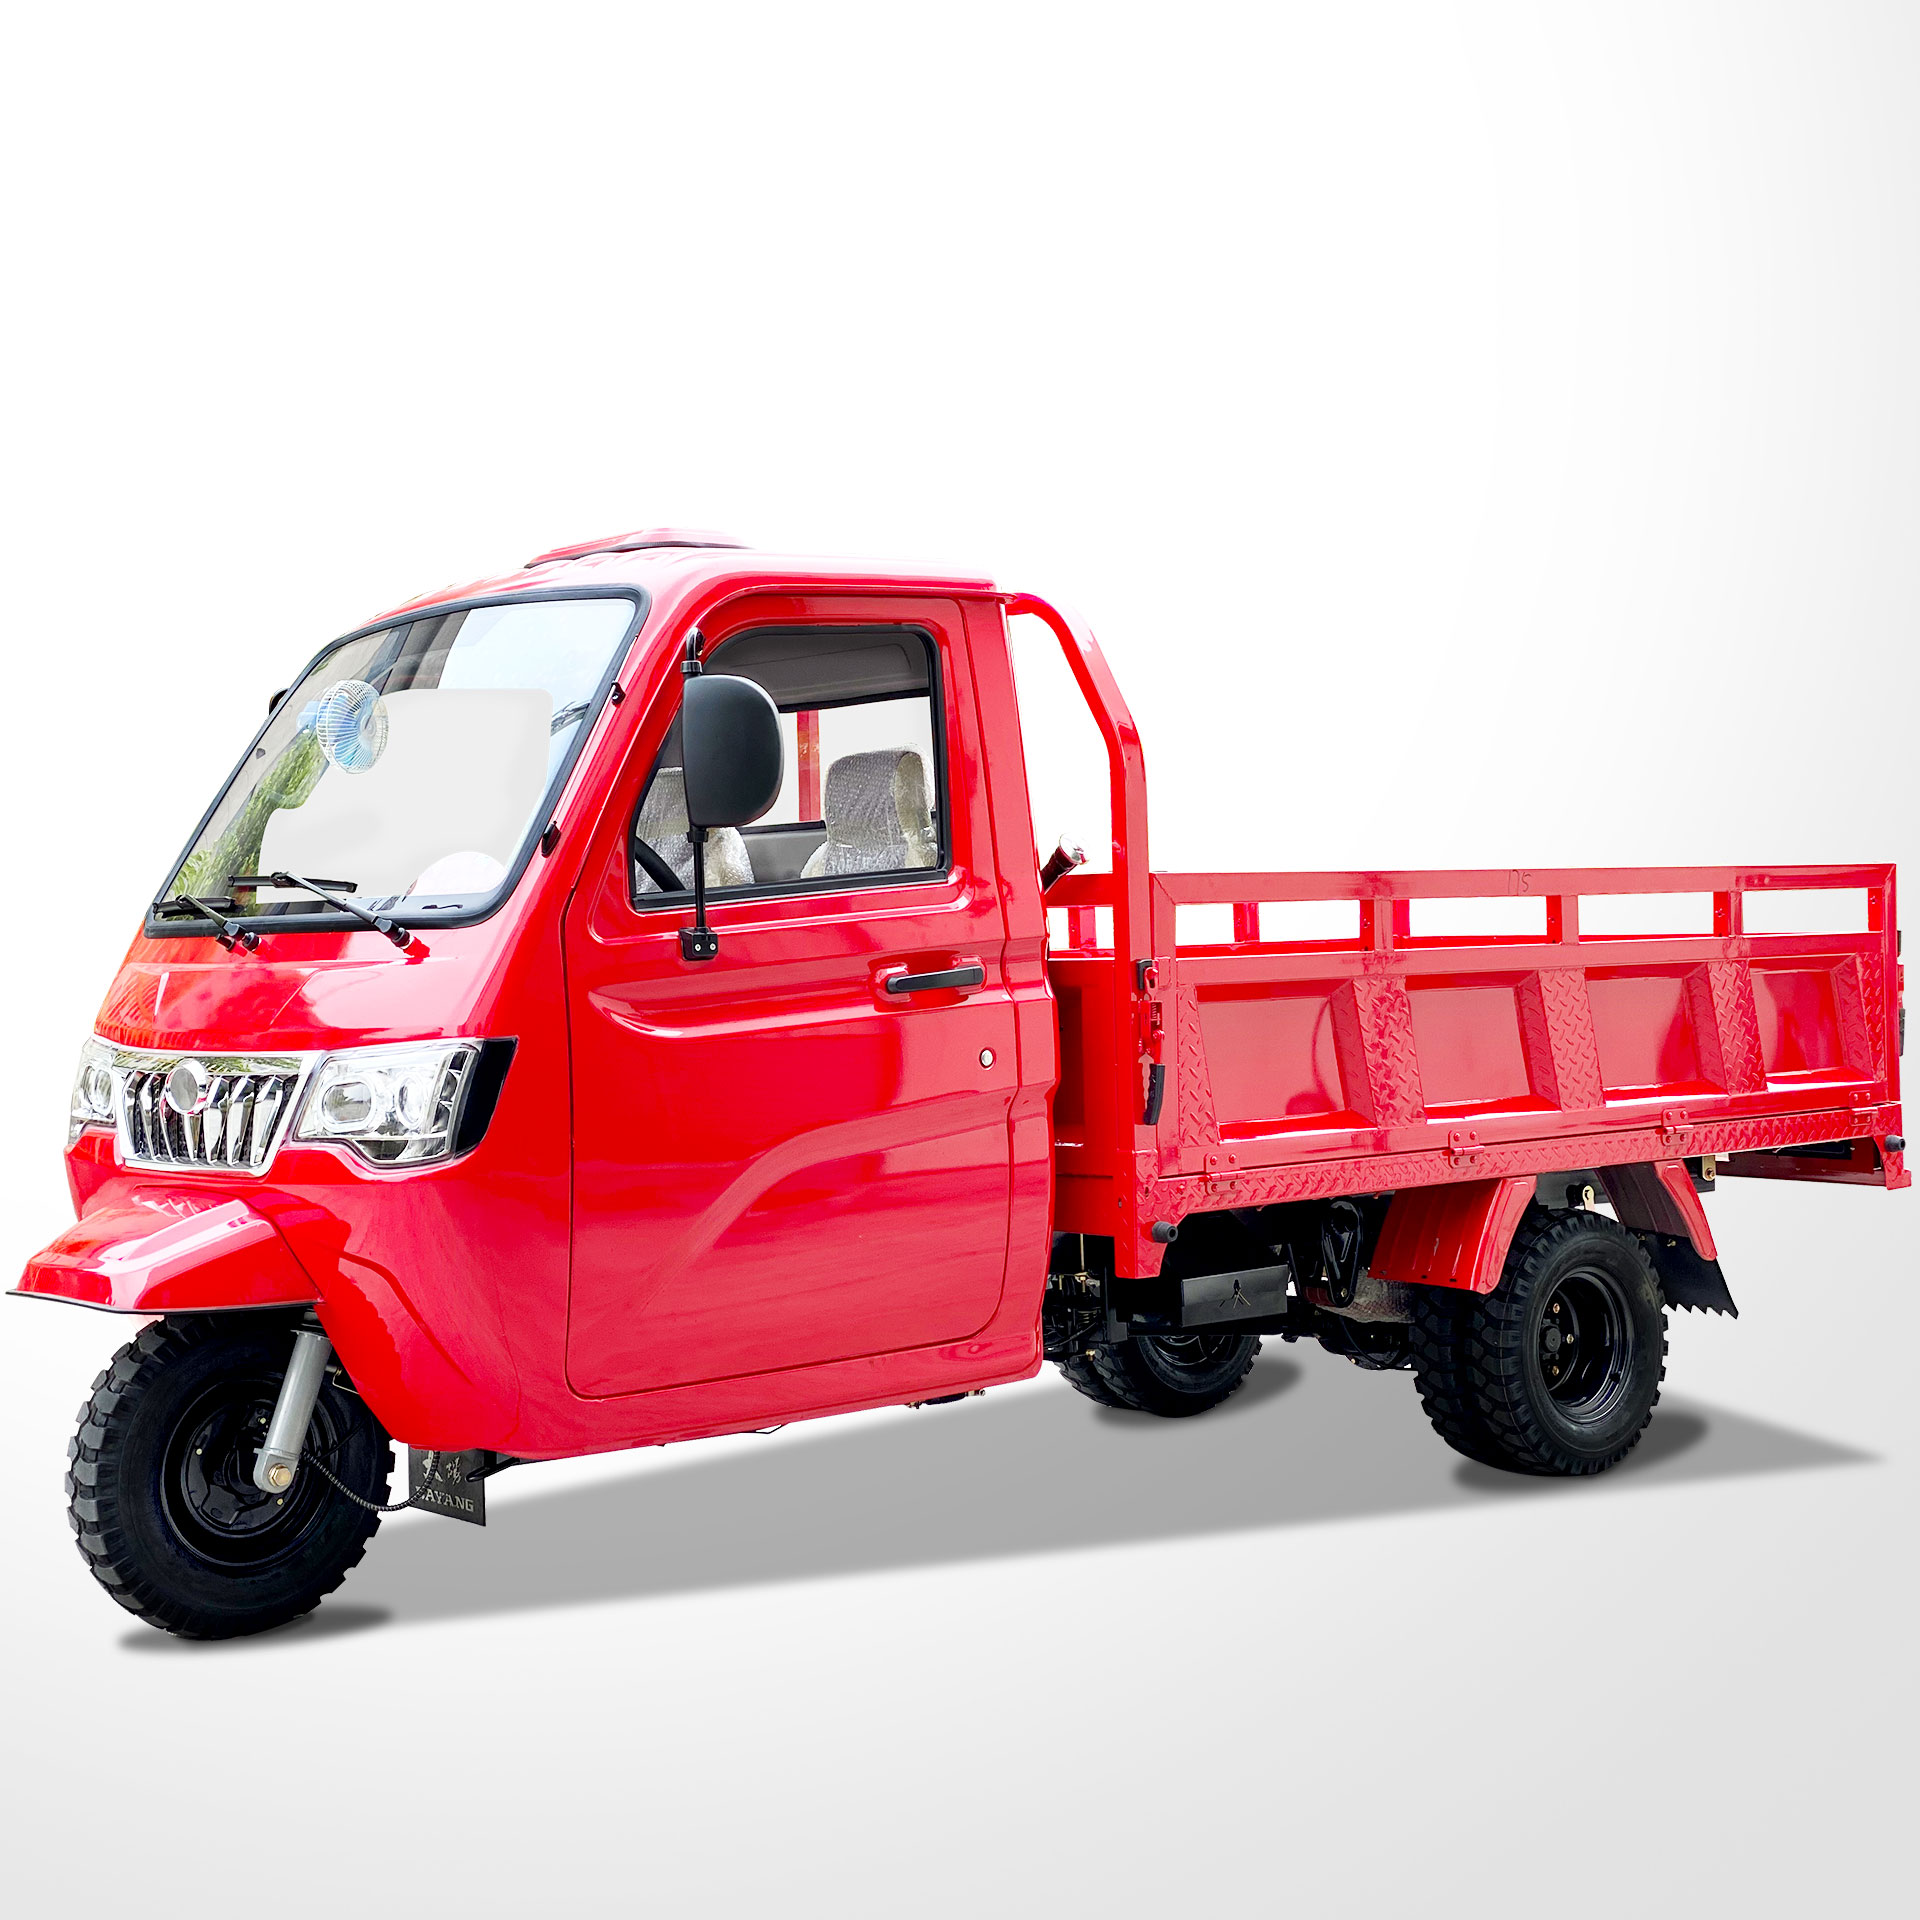 DAYANG Brand tricycle exportateurs new design cargo tricycle petrol and gas enclosed cabin made in china